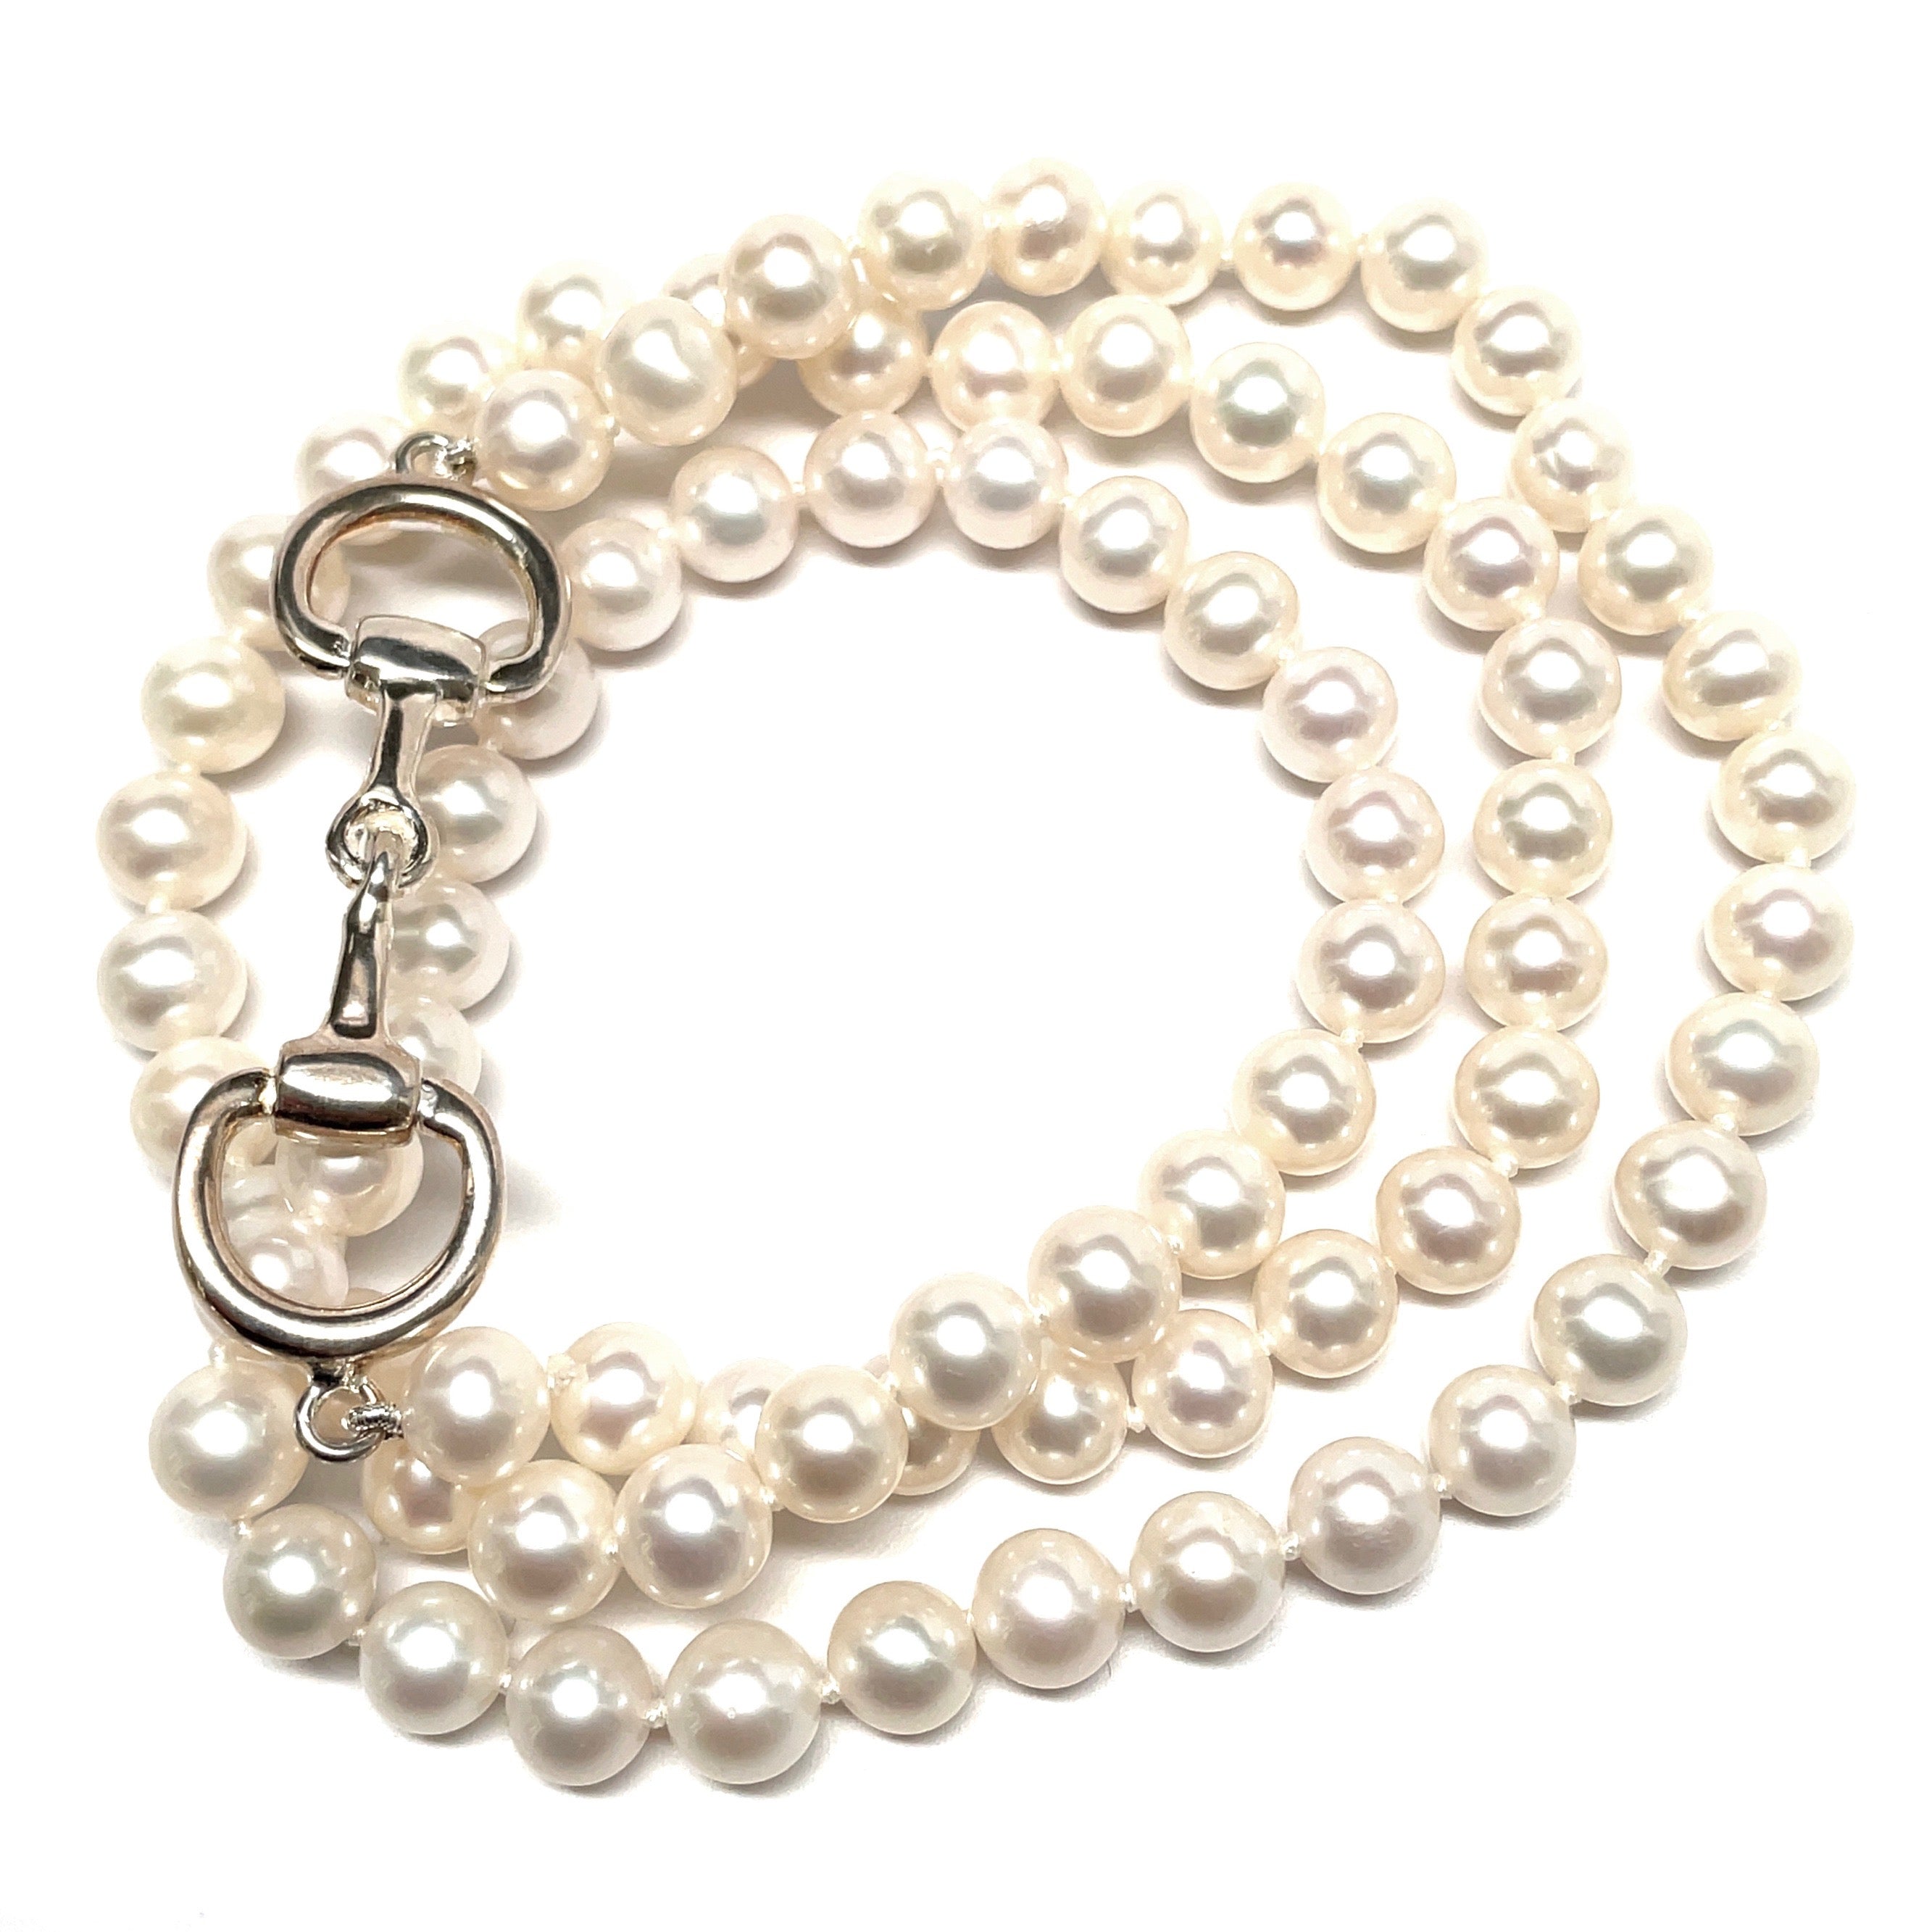 Equestrian sterling silver bit and pearl necklace